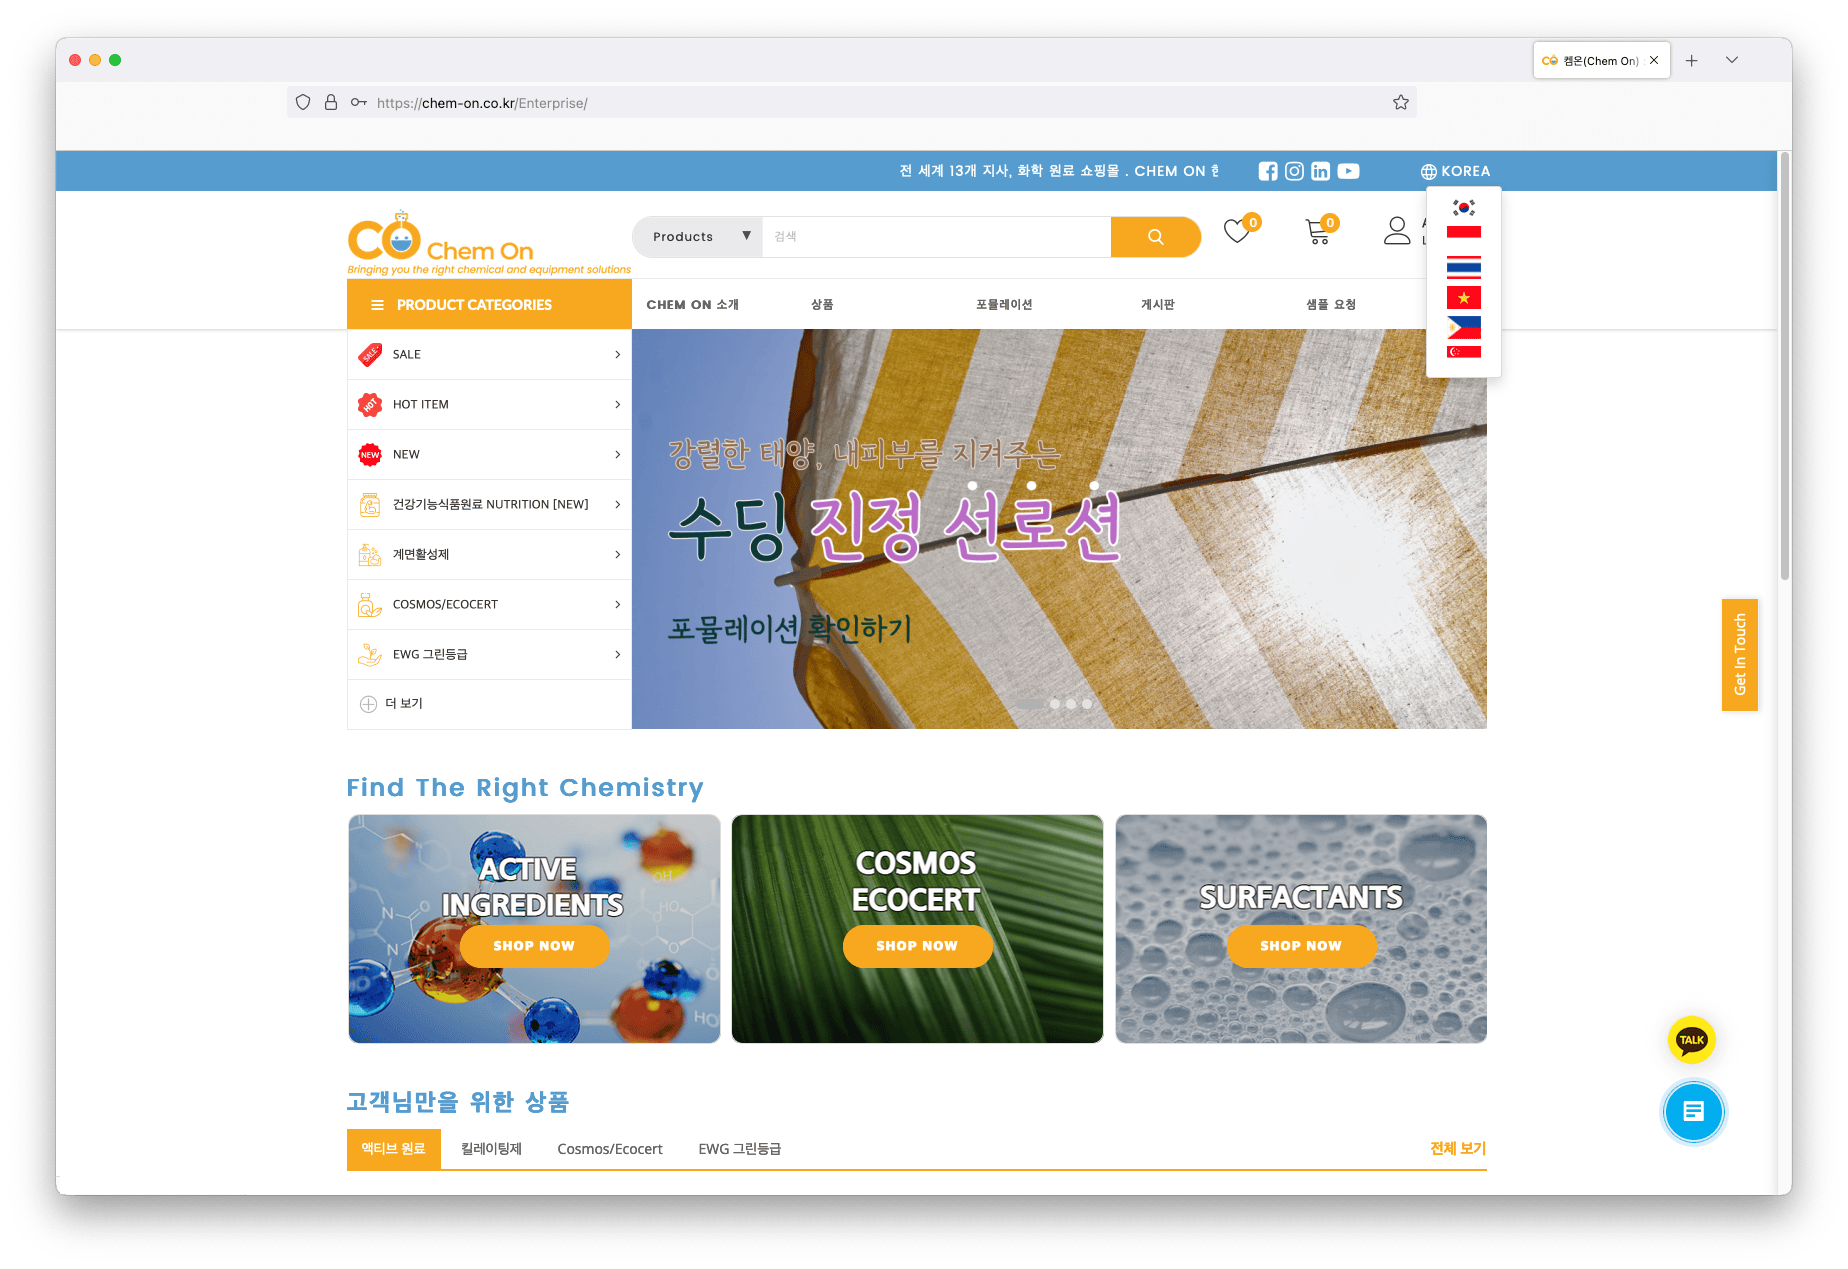 chem-on.co.kr/Enterprise online chemical Ecommerce with new theme, features and online payment gateway